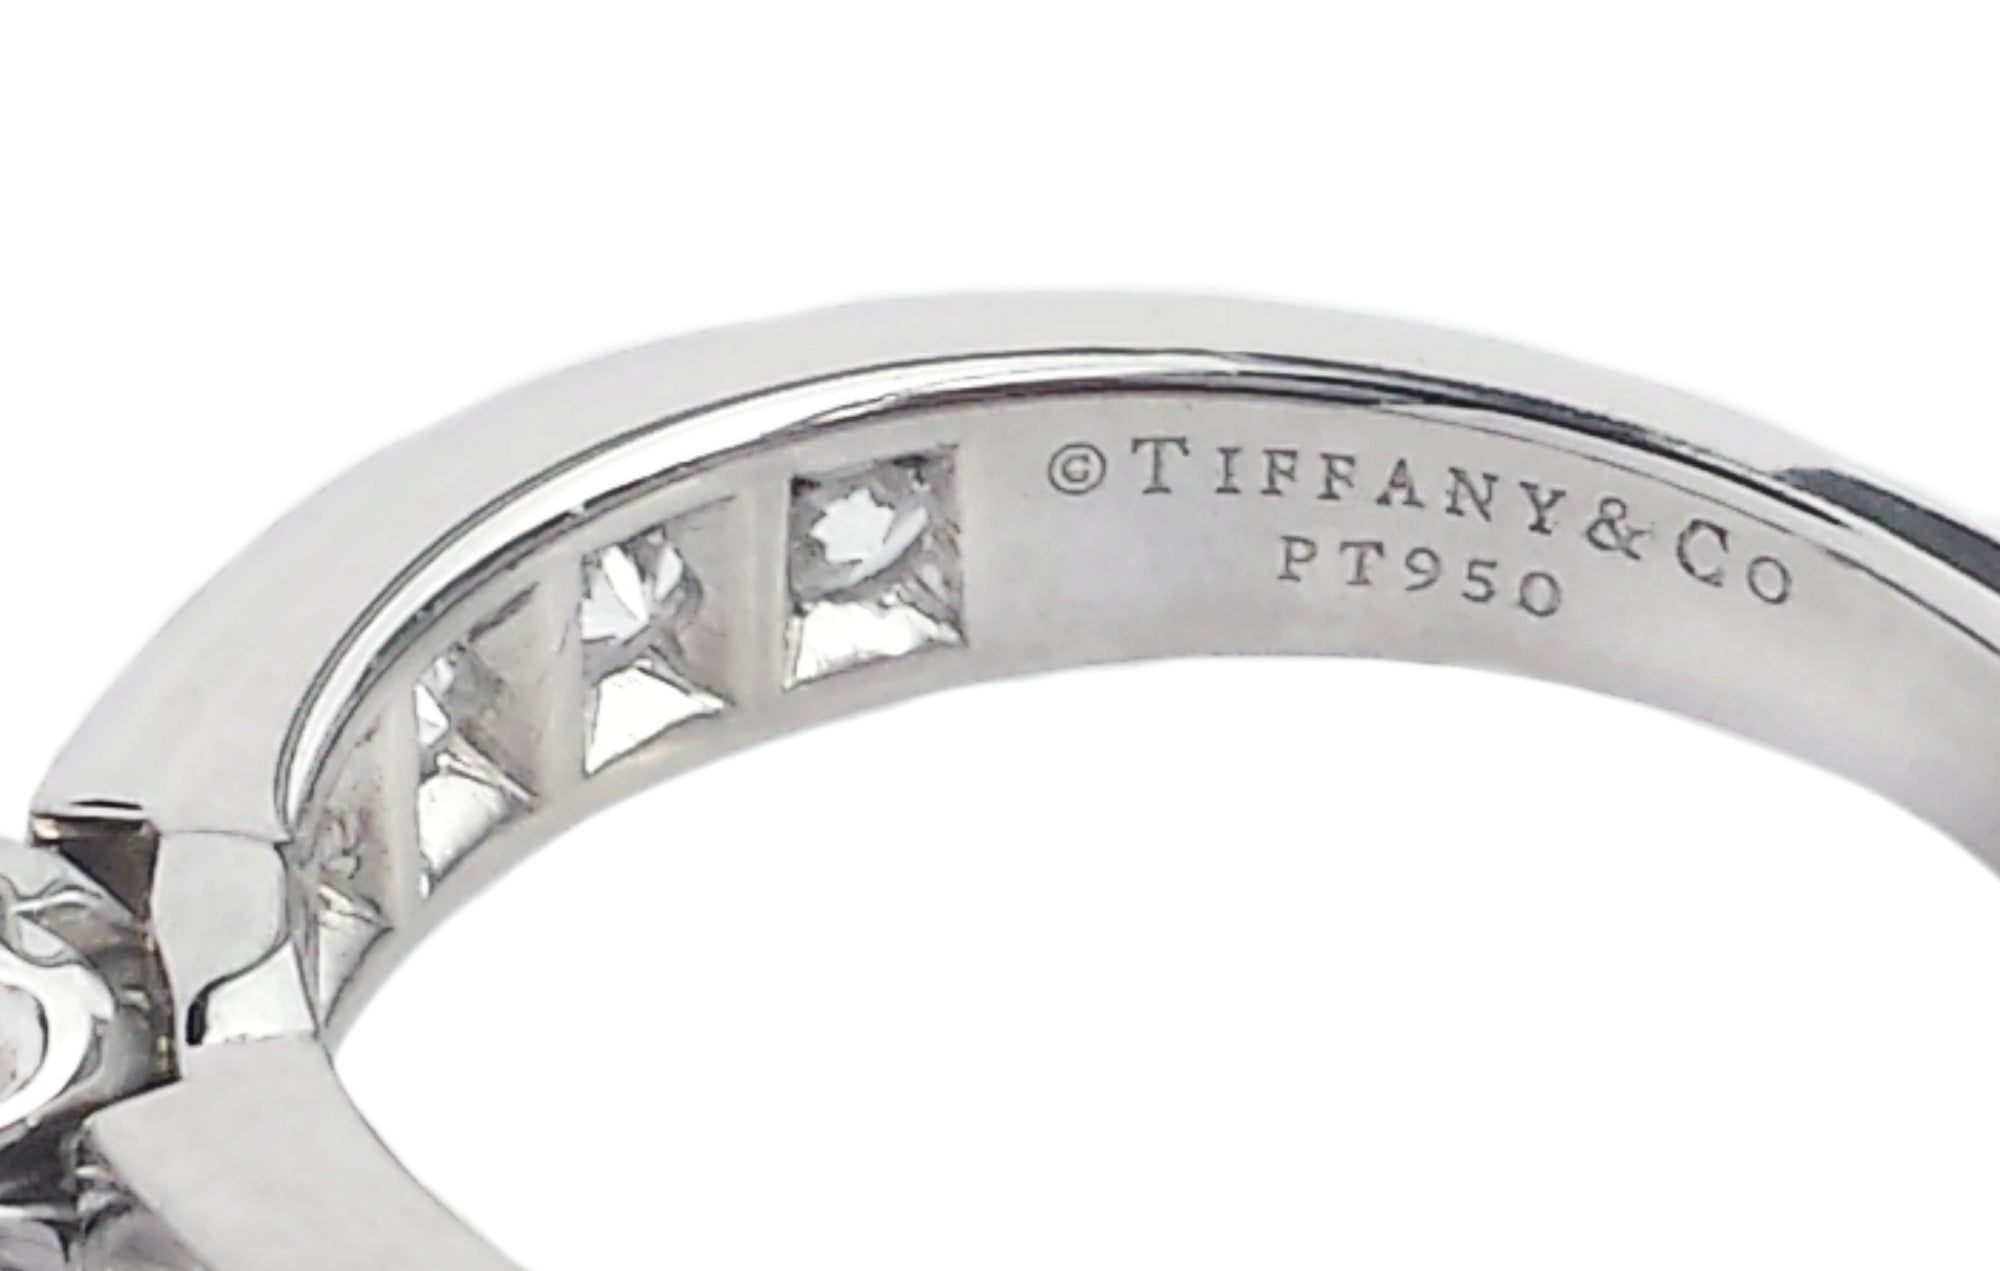 Tiffany & Co. 2.79tcw D/VVS2 Round Brilliant Diamond Engagement Ring with Side Stones